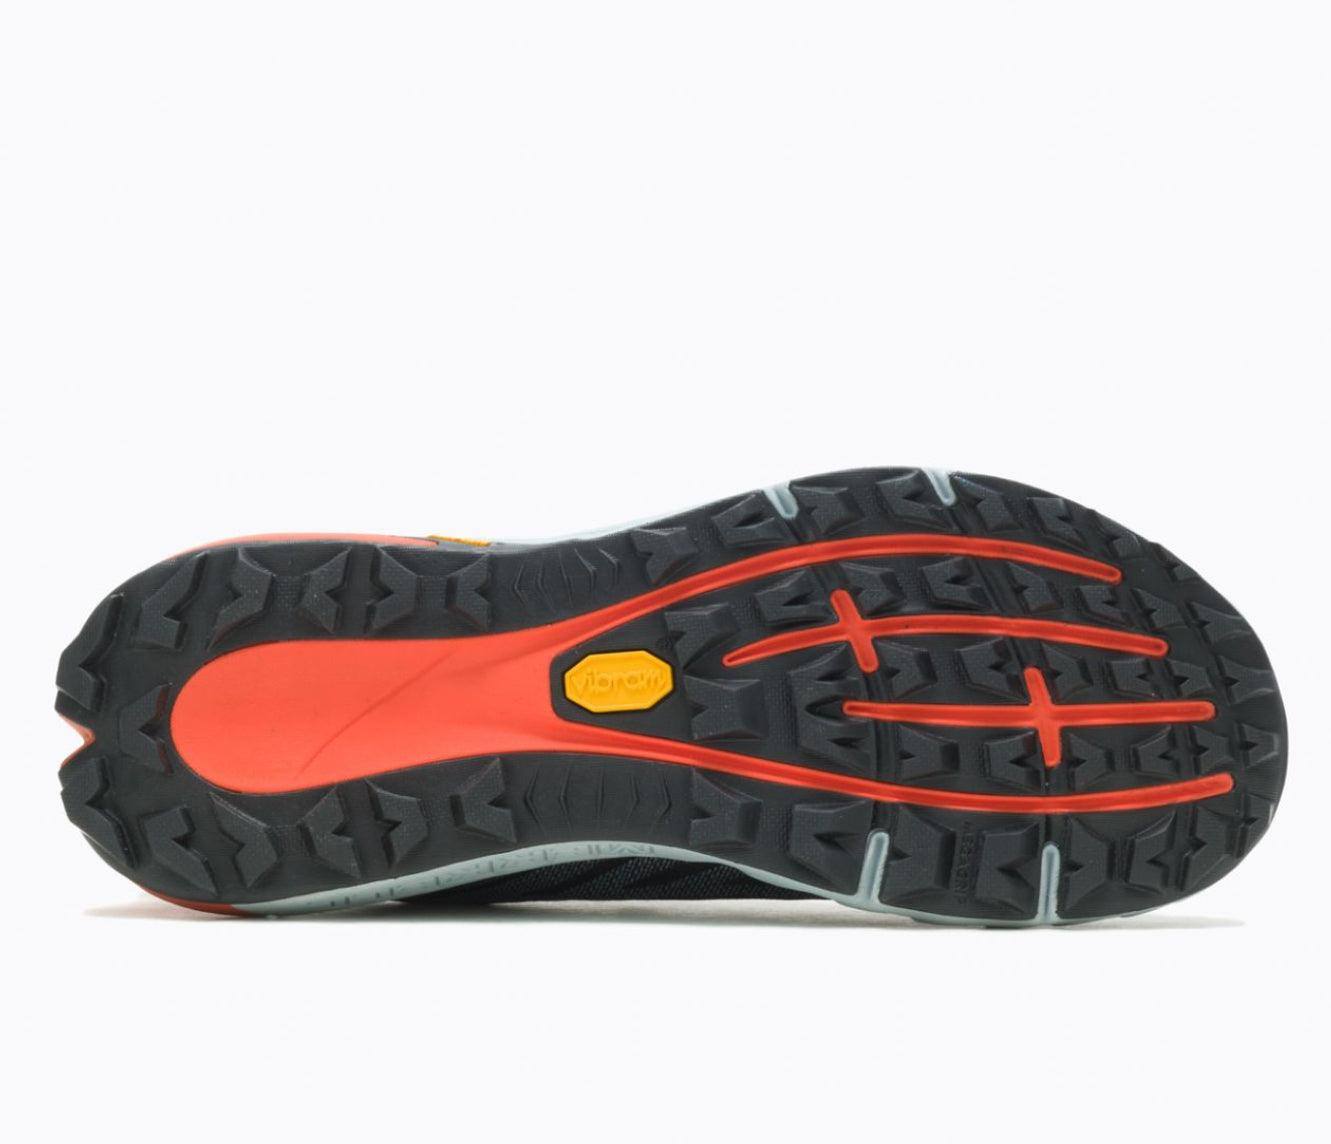 Mens Agility Peak 4 Running Shoes - The Shoe CollectiveMerrell